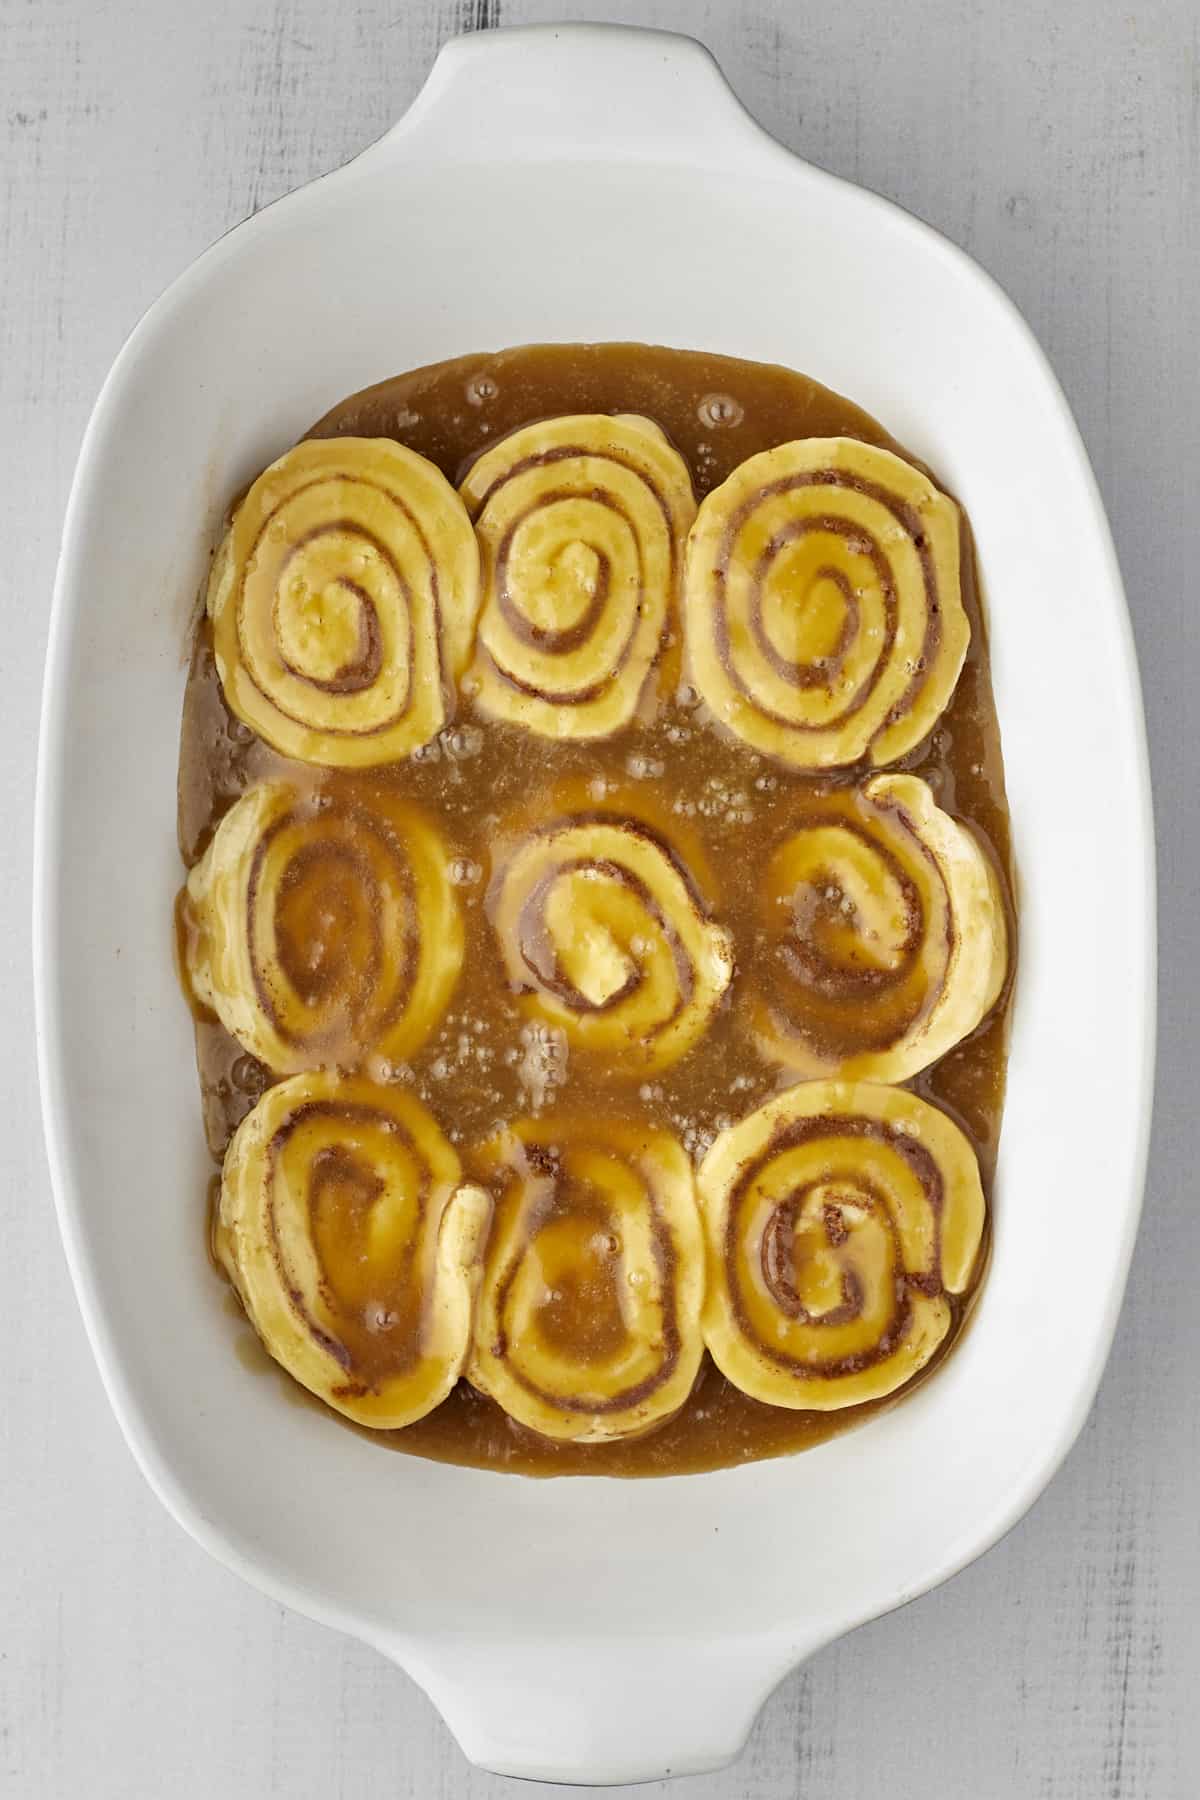 unbaked cinnamon rolls in between layers of homemade caramel sauce